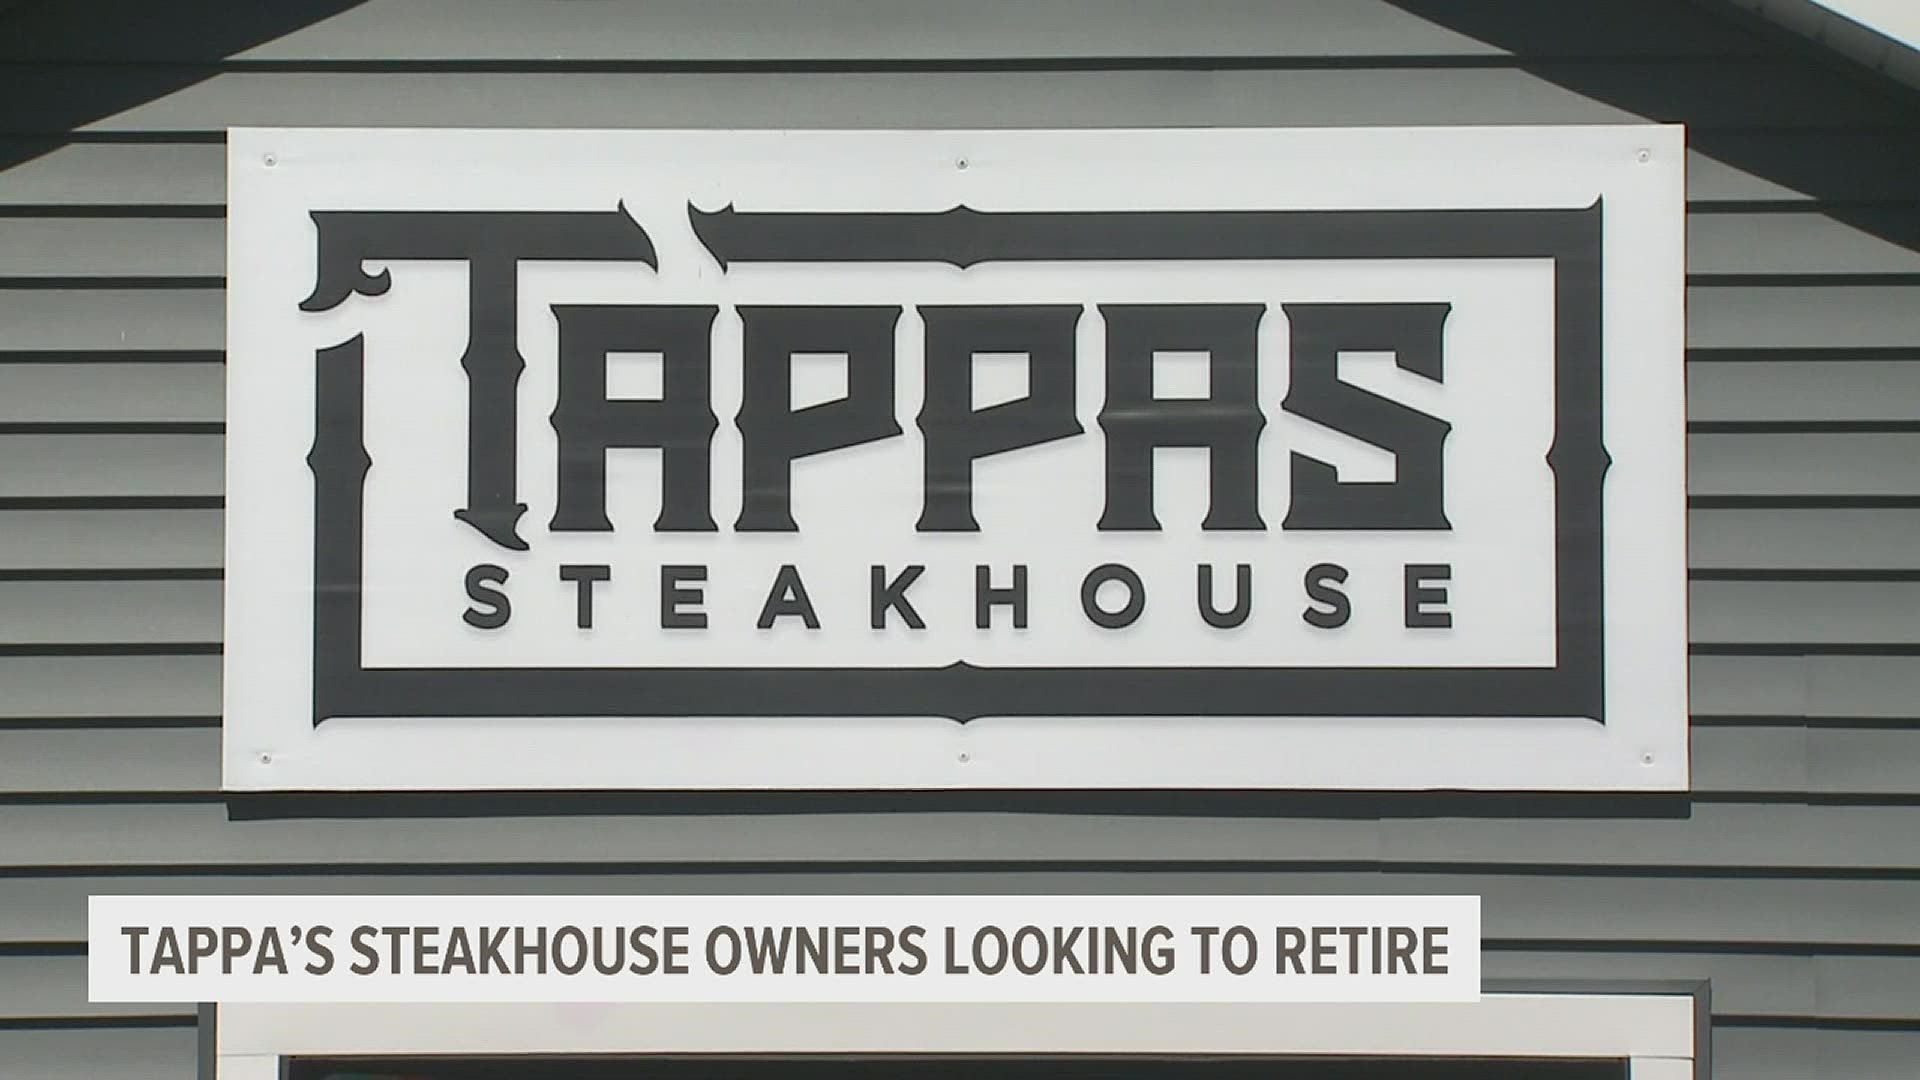 After 40 years in the business, Cliff and Jan Tappa are looking to retire. To do so, they are seeking new ownership for Tappa's Steakhouse